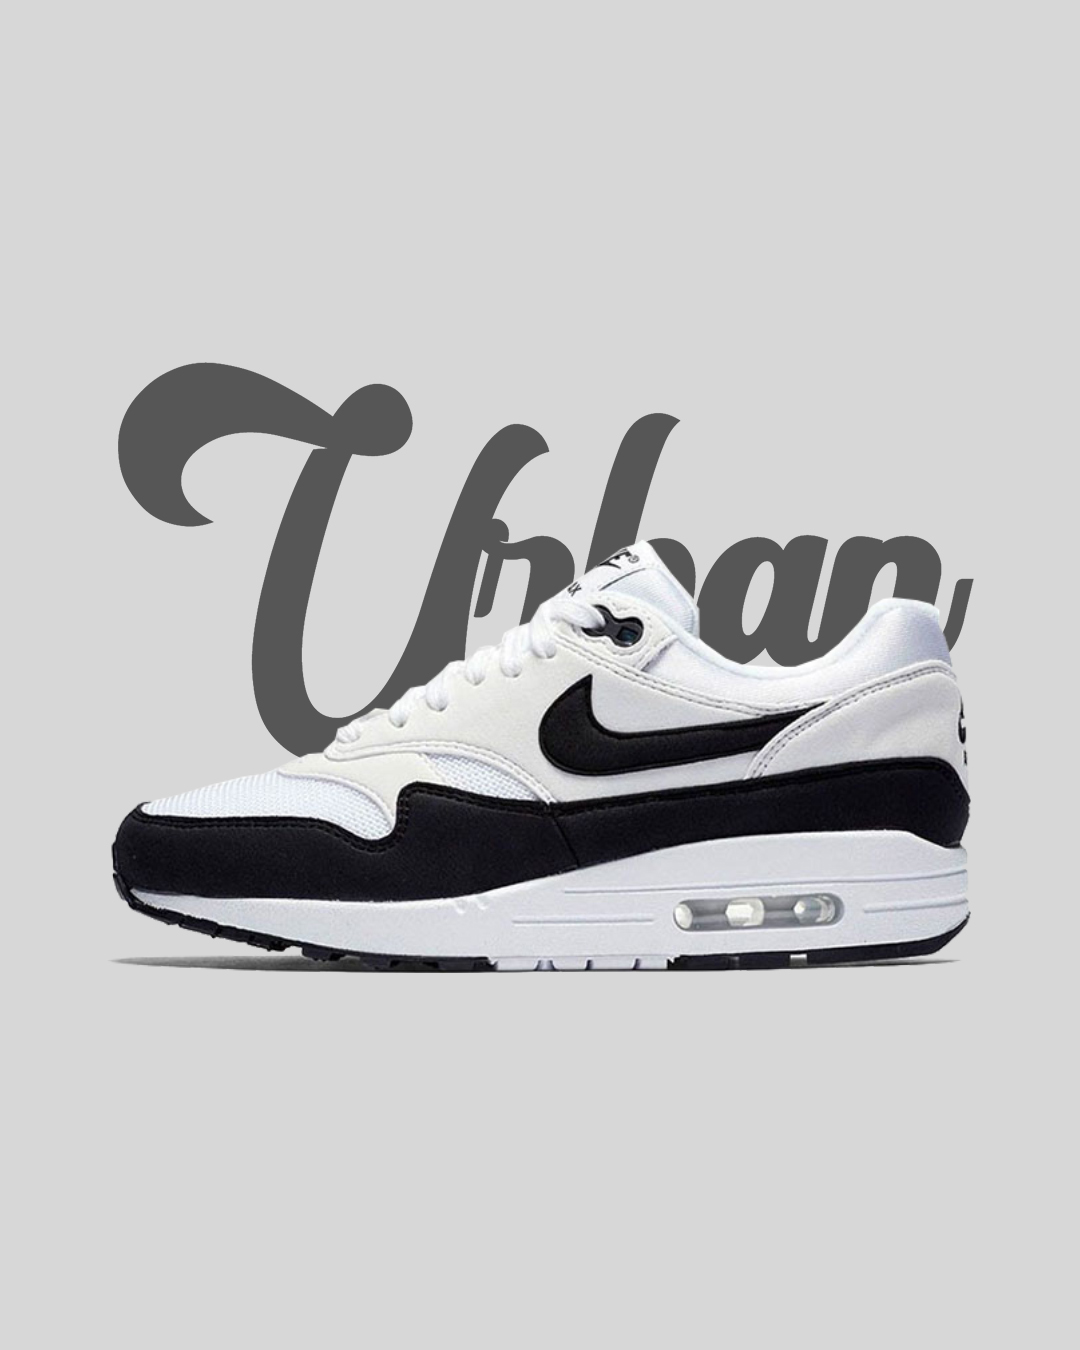 Nike Air Max 1 Black and white Urban Collection